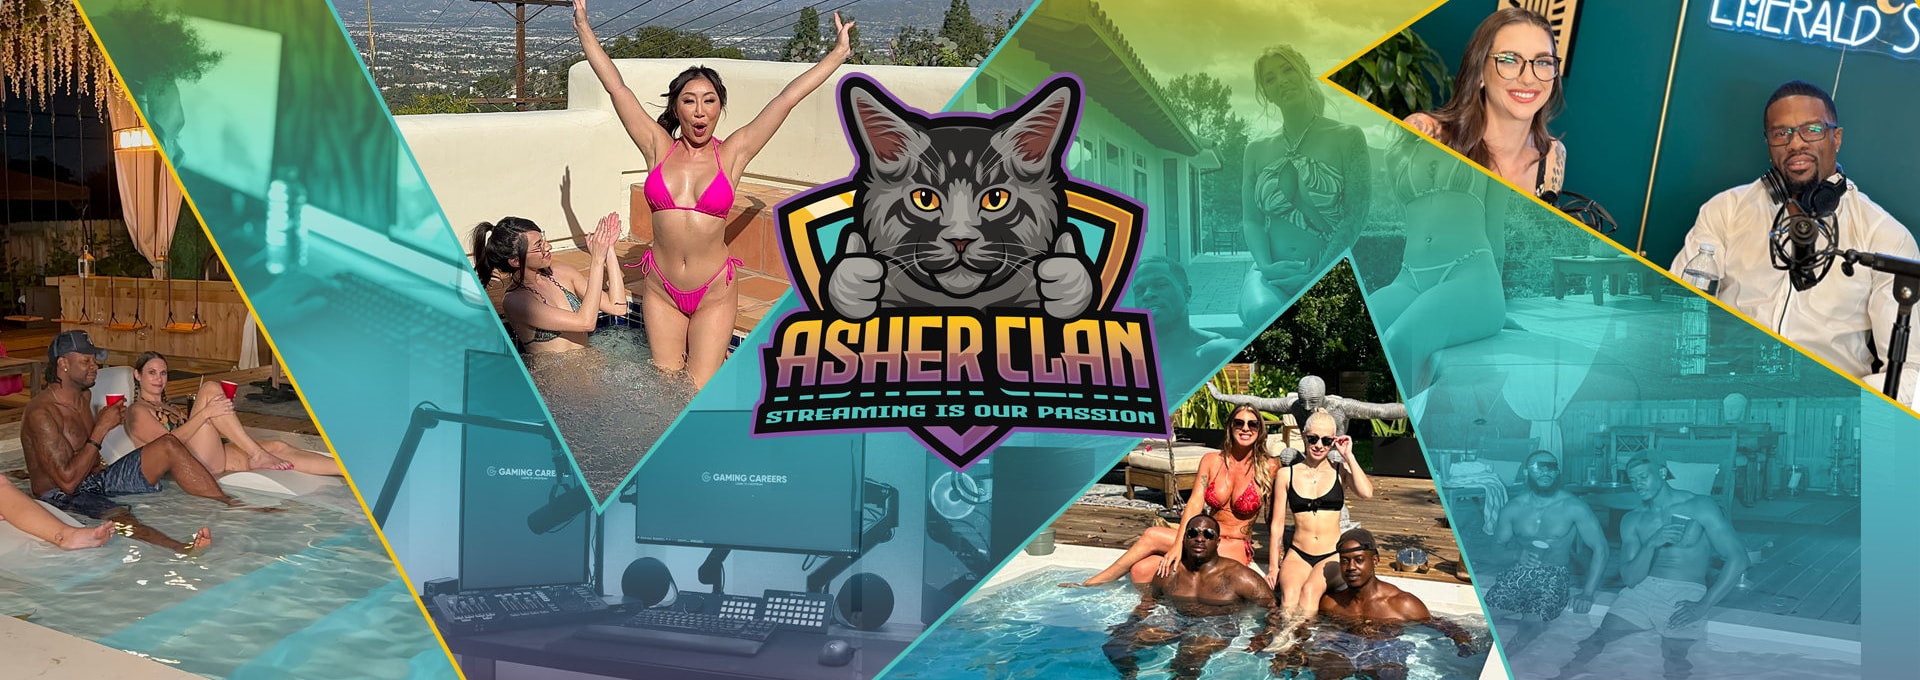 Asher Clan Podcast: Guest Mia James